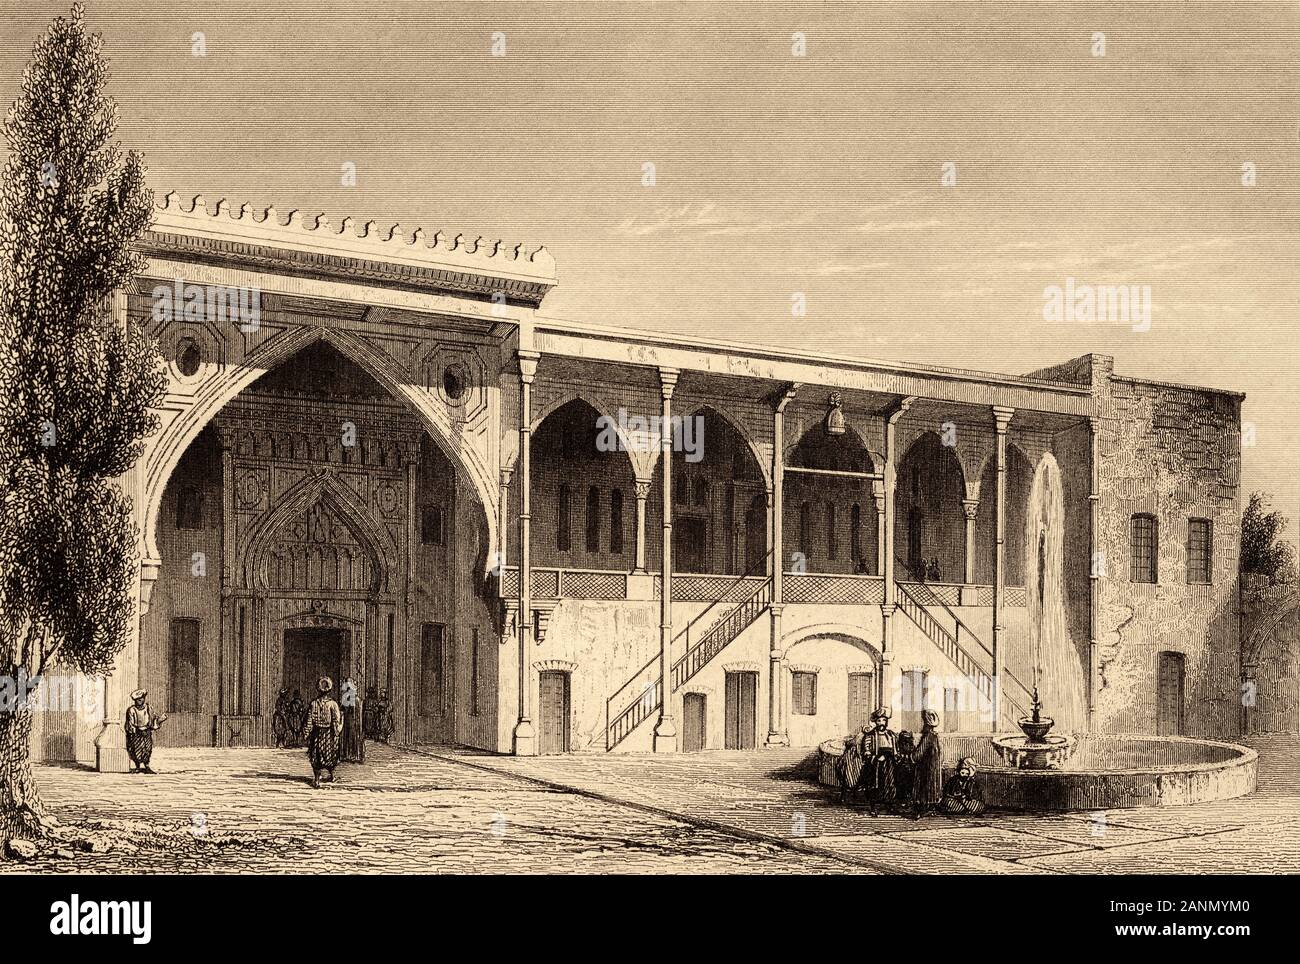 Emir's Palace in Beit ed-Dine Palace, Lebanon. Old engraving by Lemaitre published in L'Univers Syria, in 1841. History of the ancient Syria Stock Photo